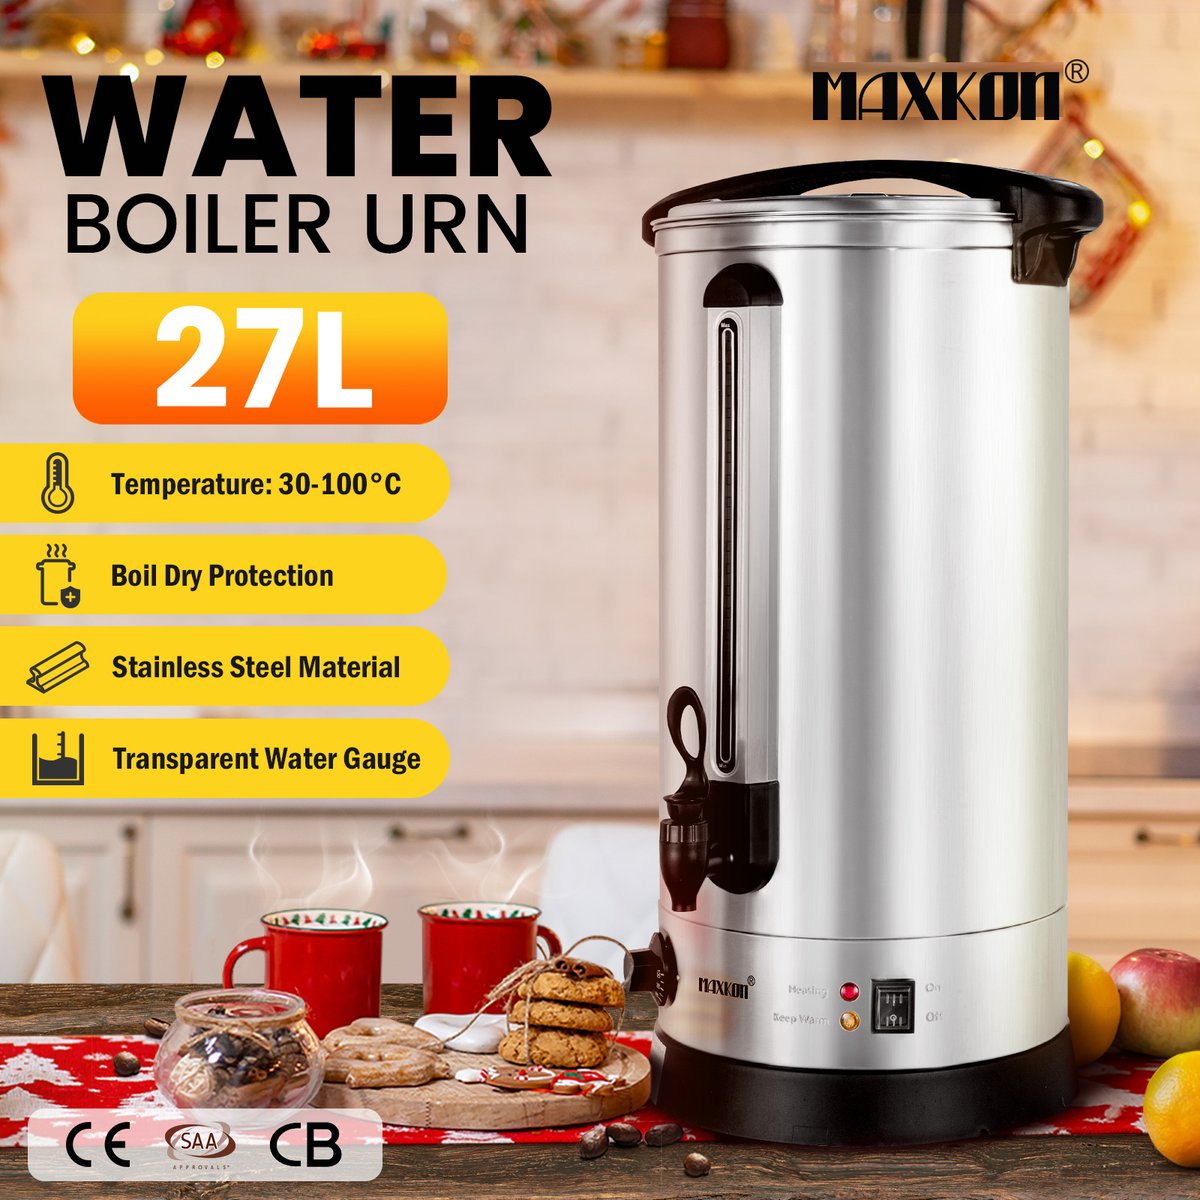 Maxkon 27L Water Dispenser Urn Instant Hot Cold Coffee Maker Tea Kettle Machine Commercial Home Stainless Steel with Tap
bit.ly/3WrvCm9
#waterdispenser #coffeetime #hotwater #drinks #dinner